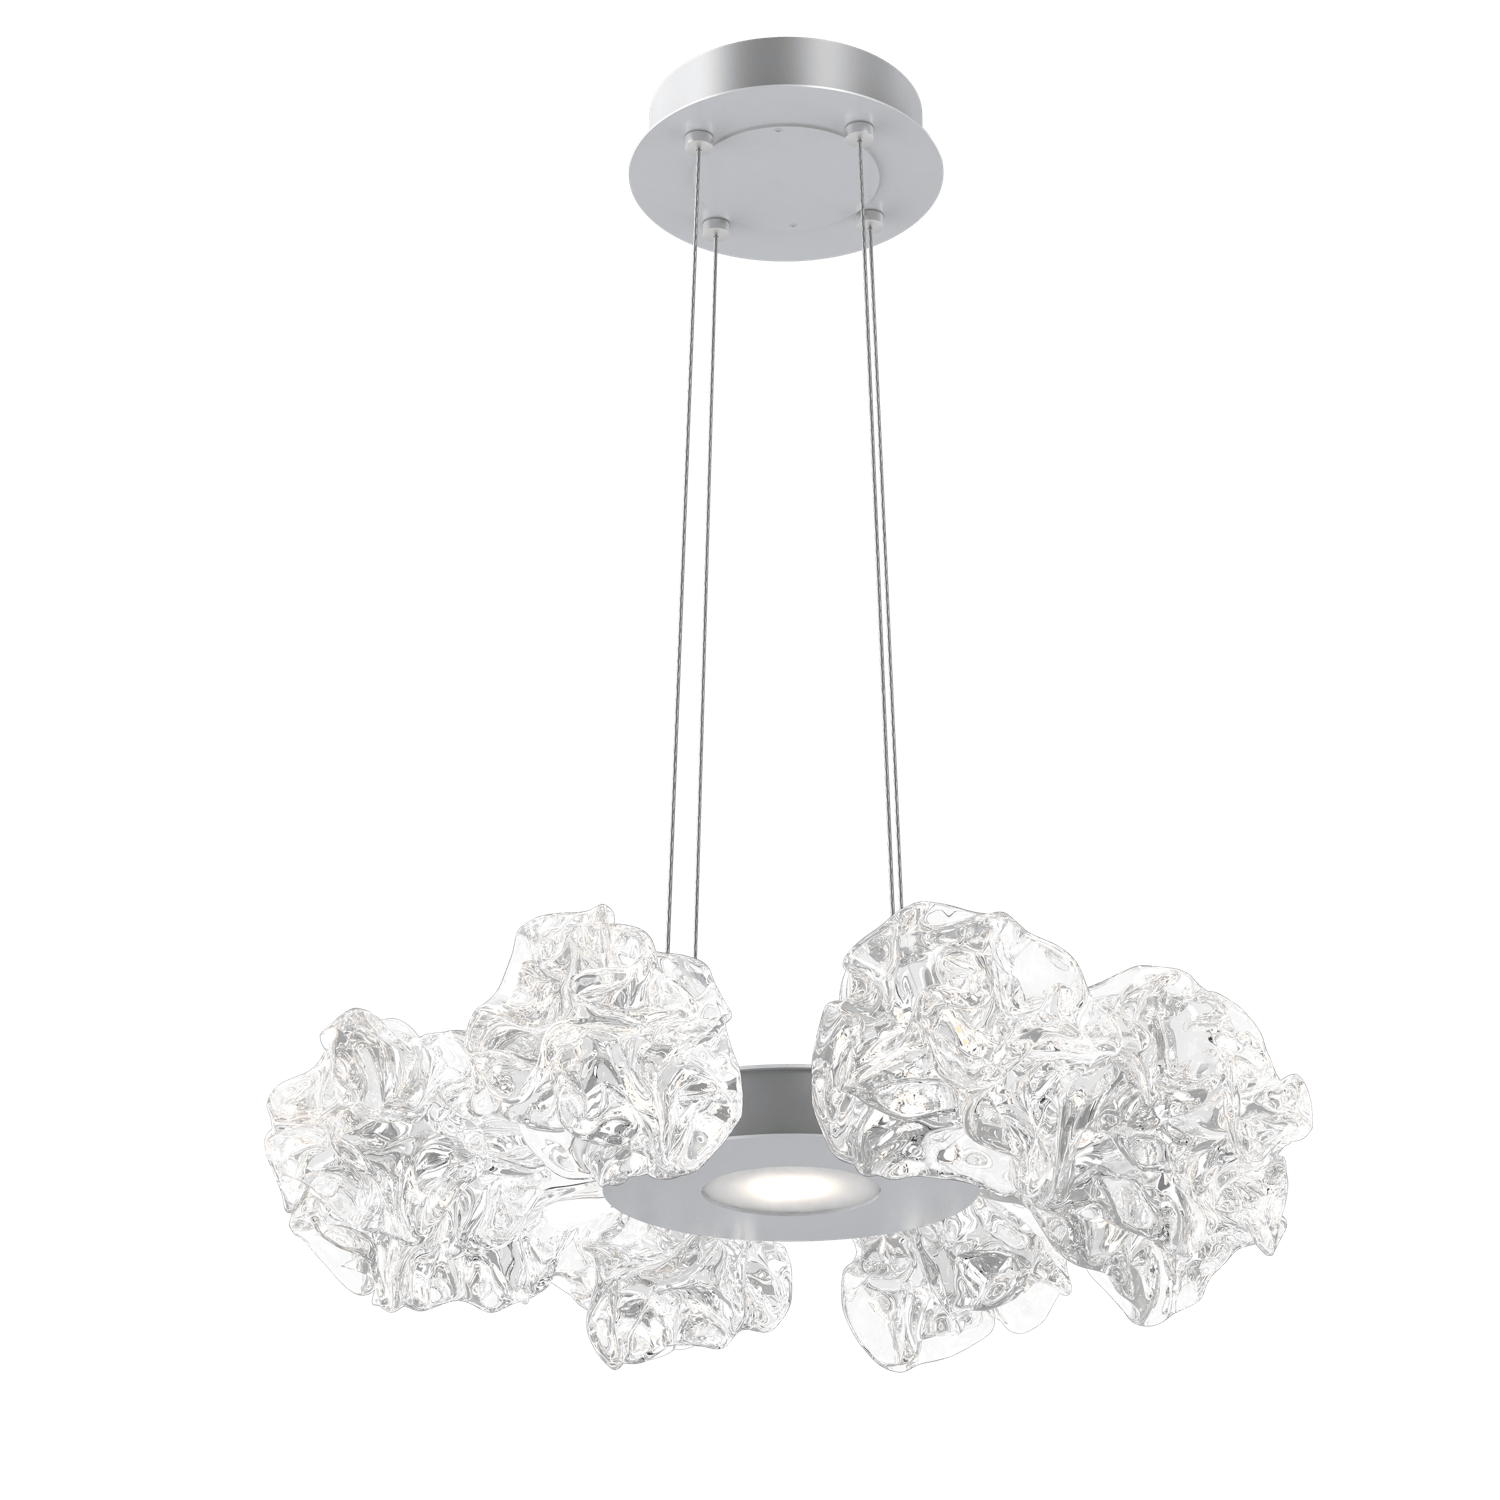 CHB0059-24-CS-Hammerton-Studio-Blossom-24-inch-radial-ring-chandelier-with-classic-silver-finish-and-clear-handblown-crystal-glass-shades-and-LED-lamping